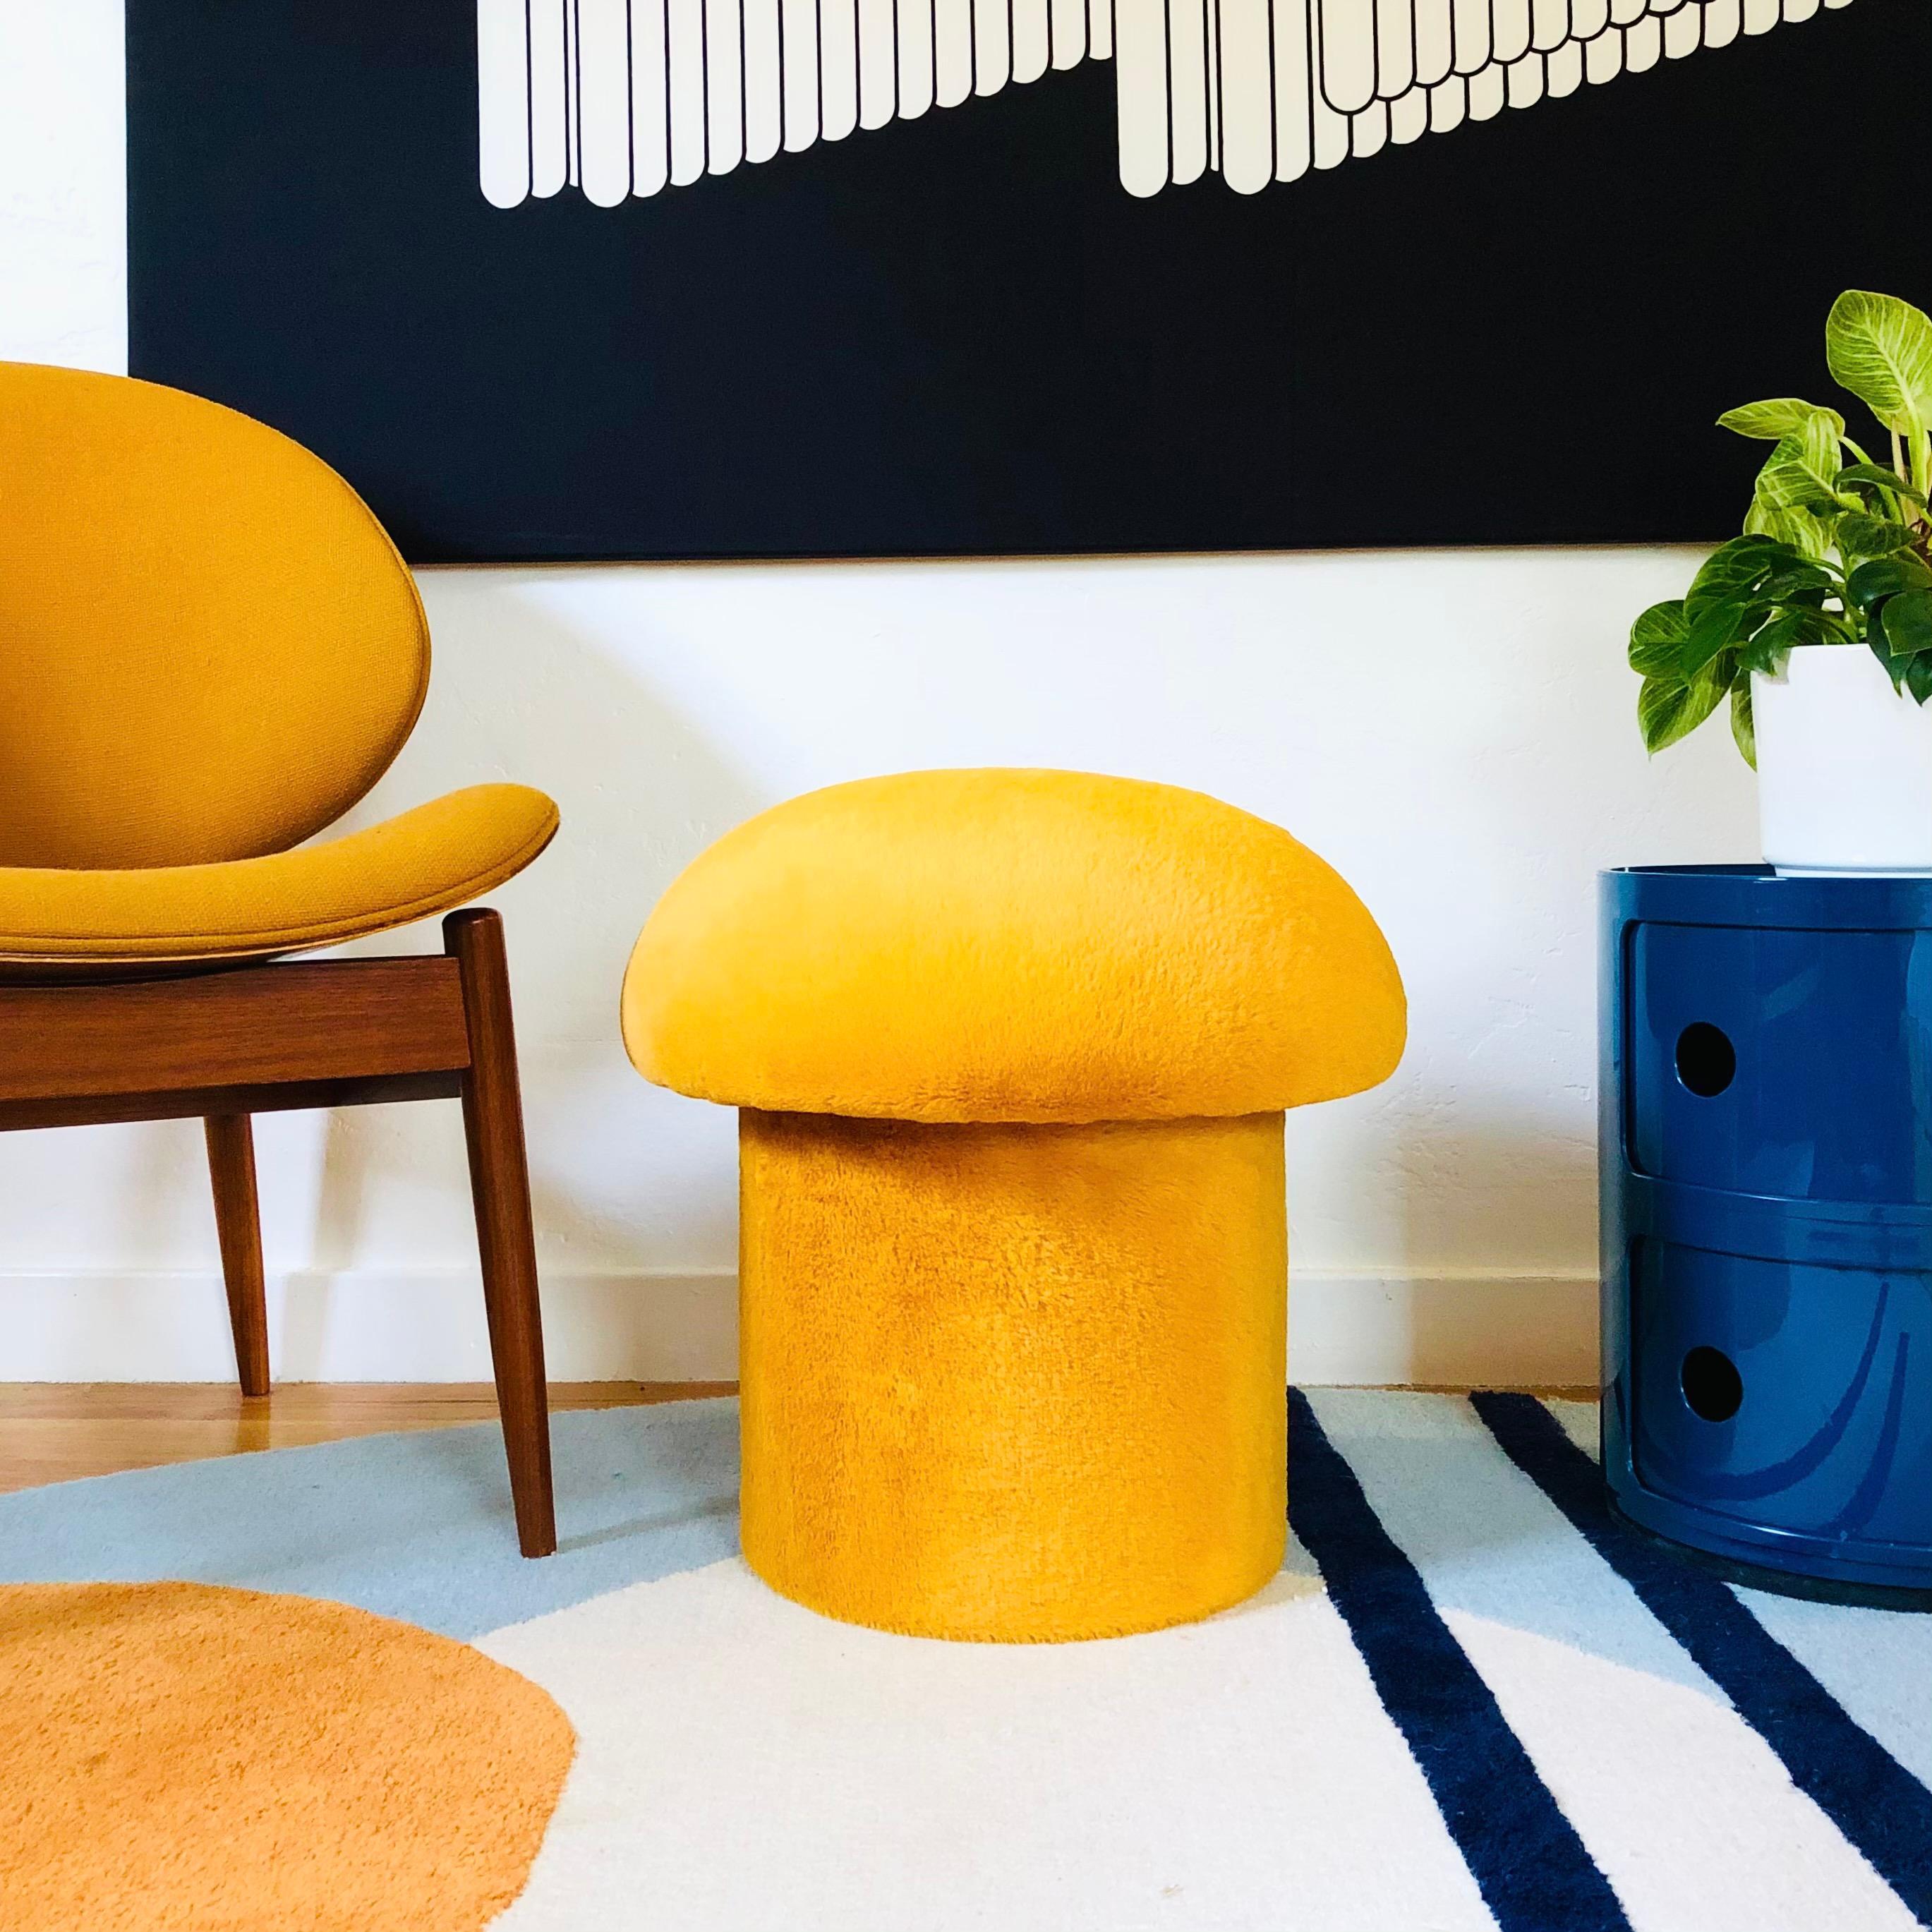 A handmade mushroom shaped ottoman, upholstered in a yellow topaz colored high pile plush fabric. Perfect for using as a footstool or extra occasional seating. A comfortable cushioned seat and sculptural accent piece.
PLEASE NOTE:
Color variations